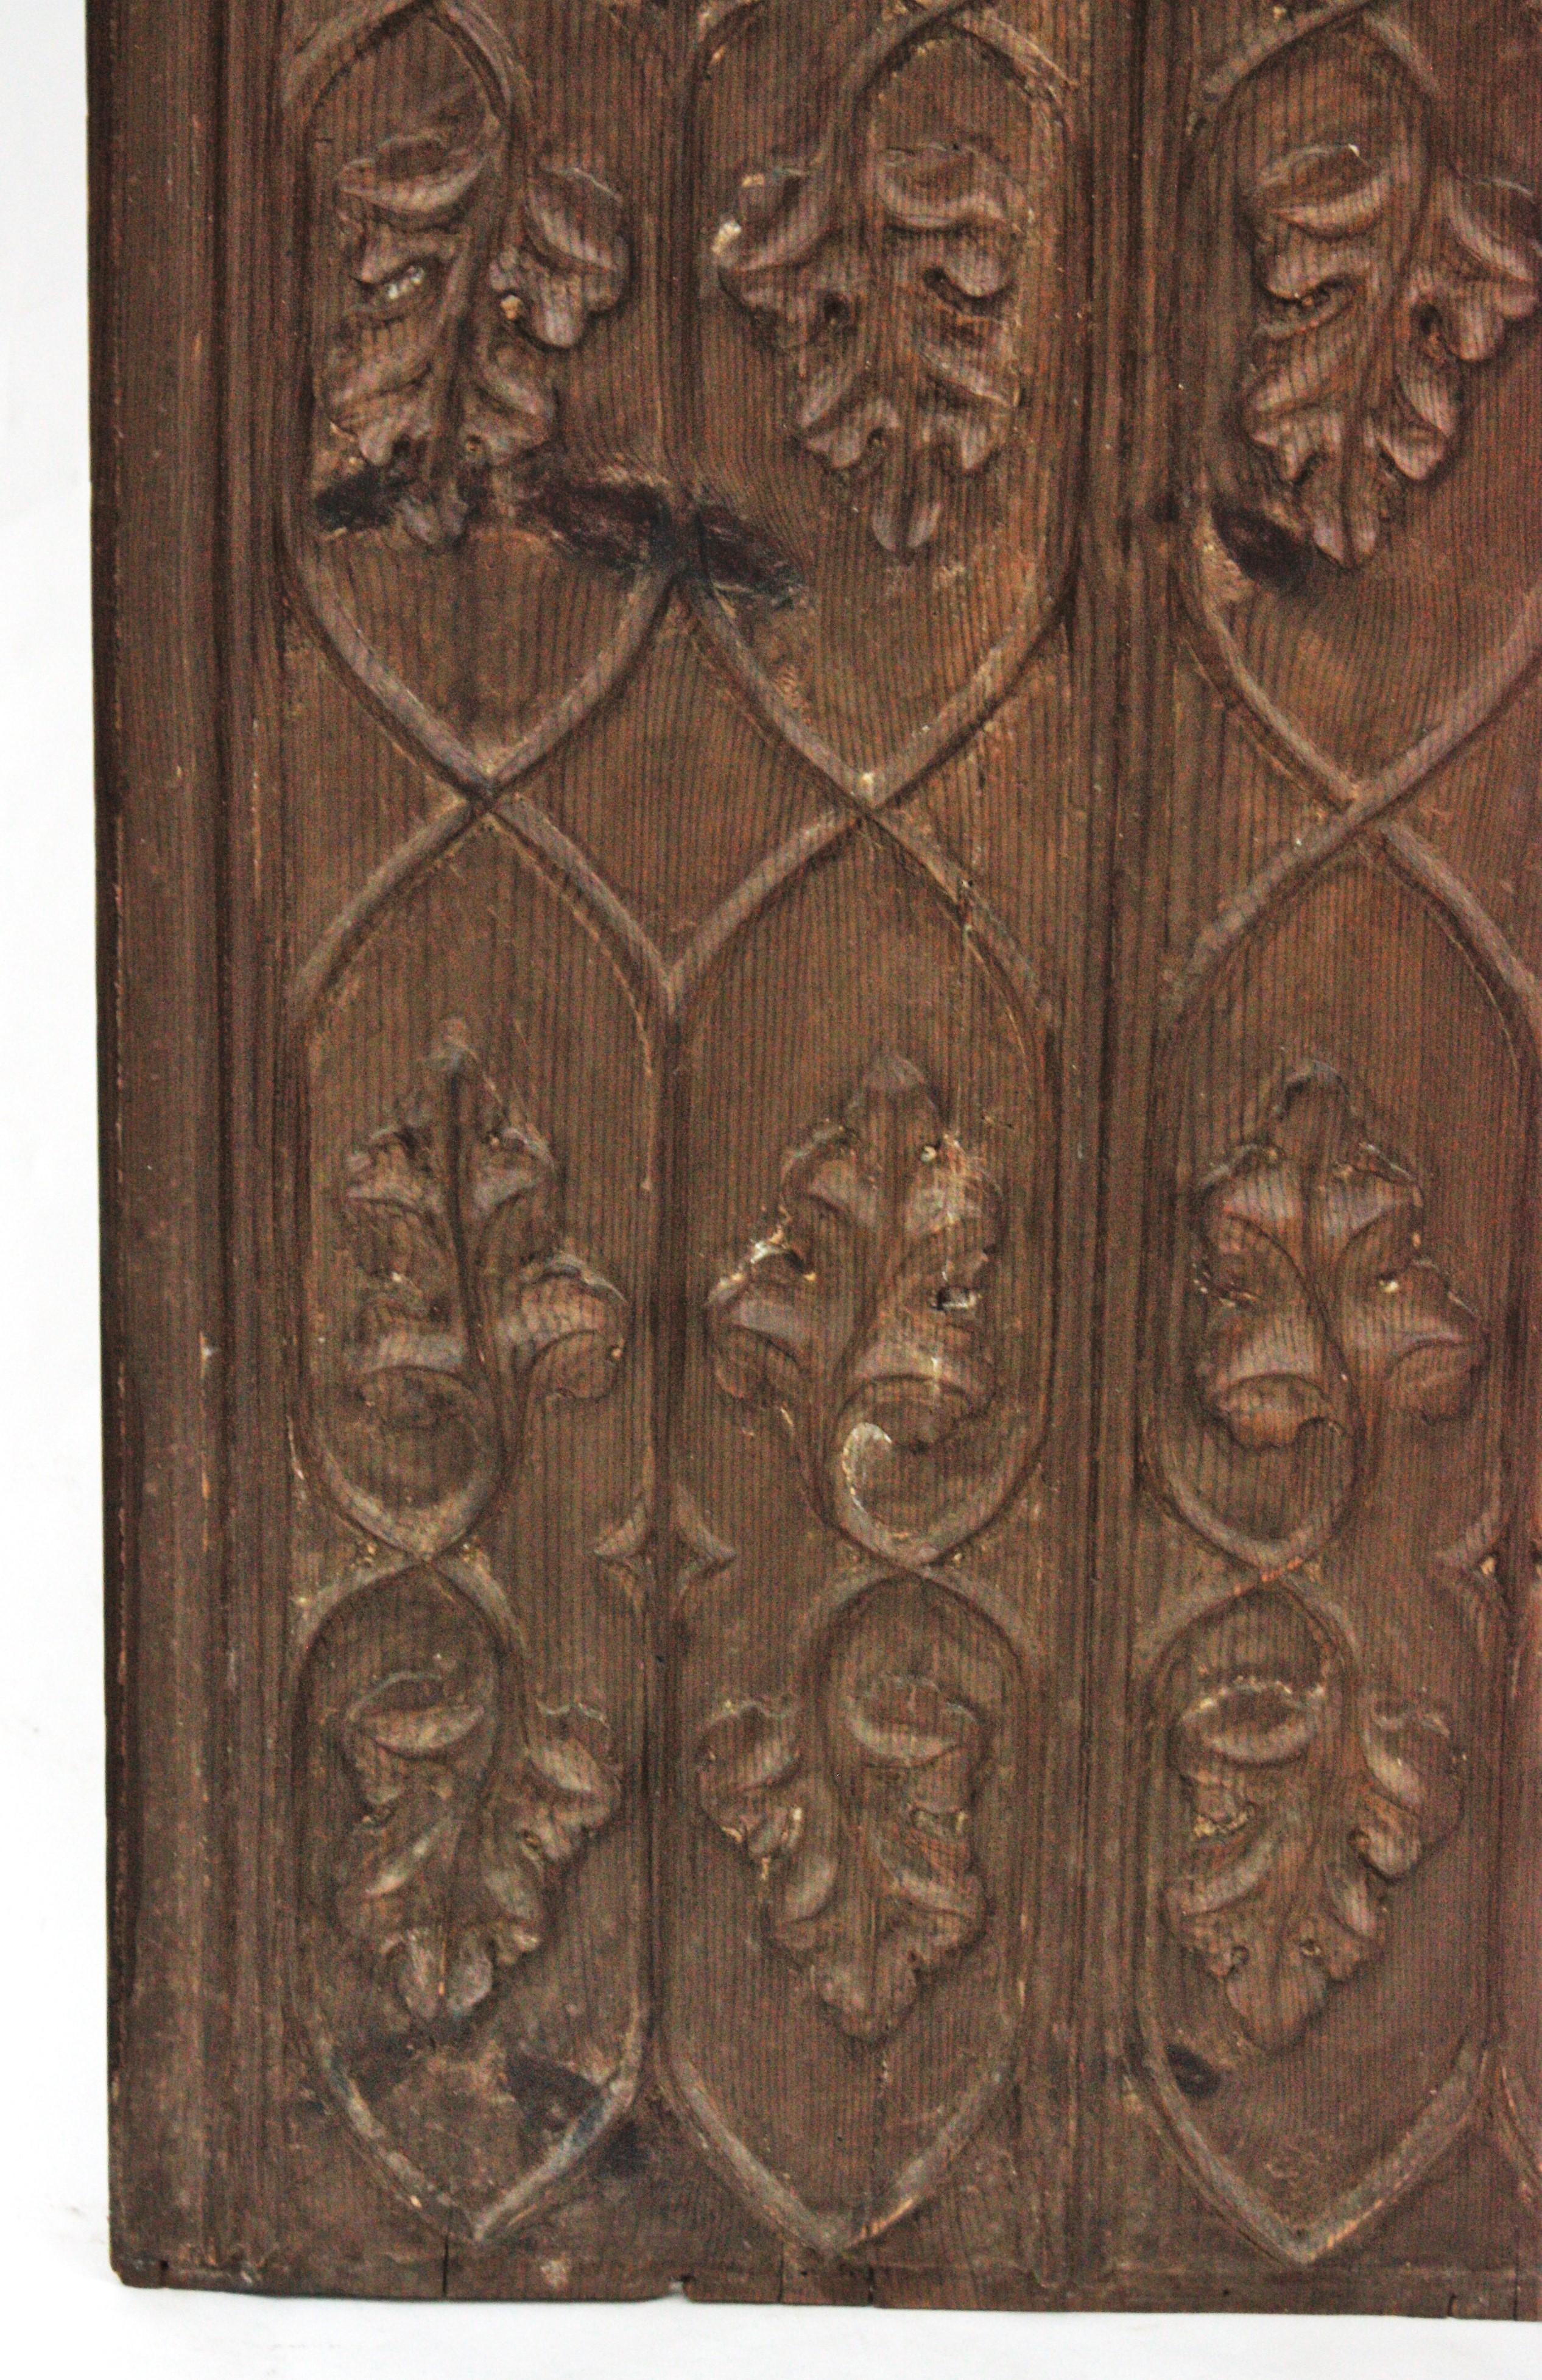 Spanish Hand-Carved Walnut Wood Decorative Wall Panel with Foliage Motifs For Sale 2